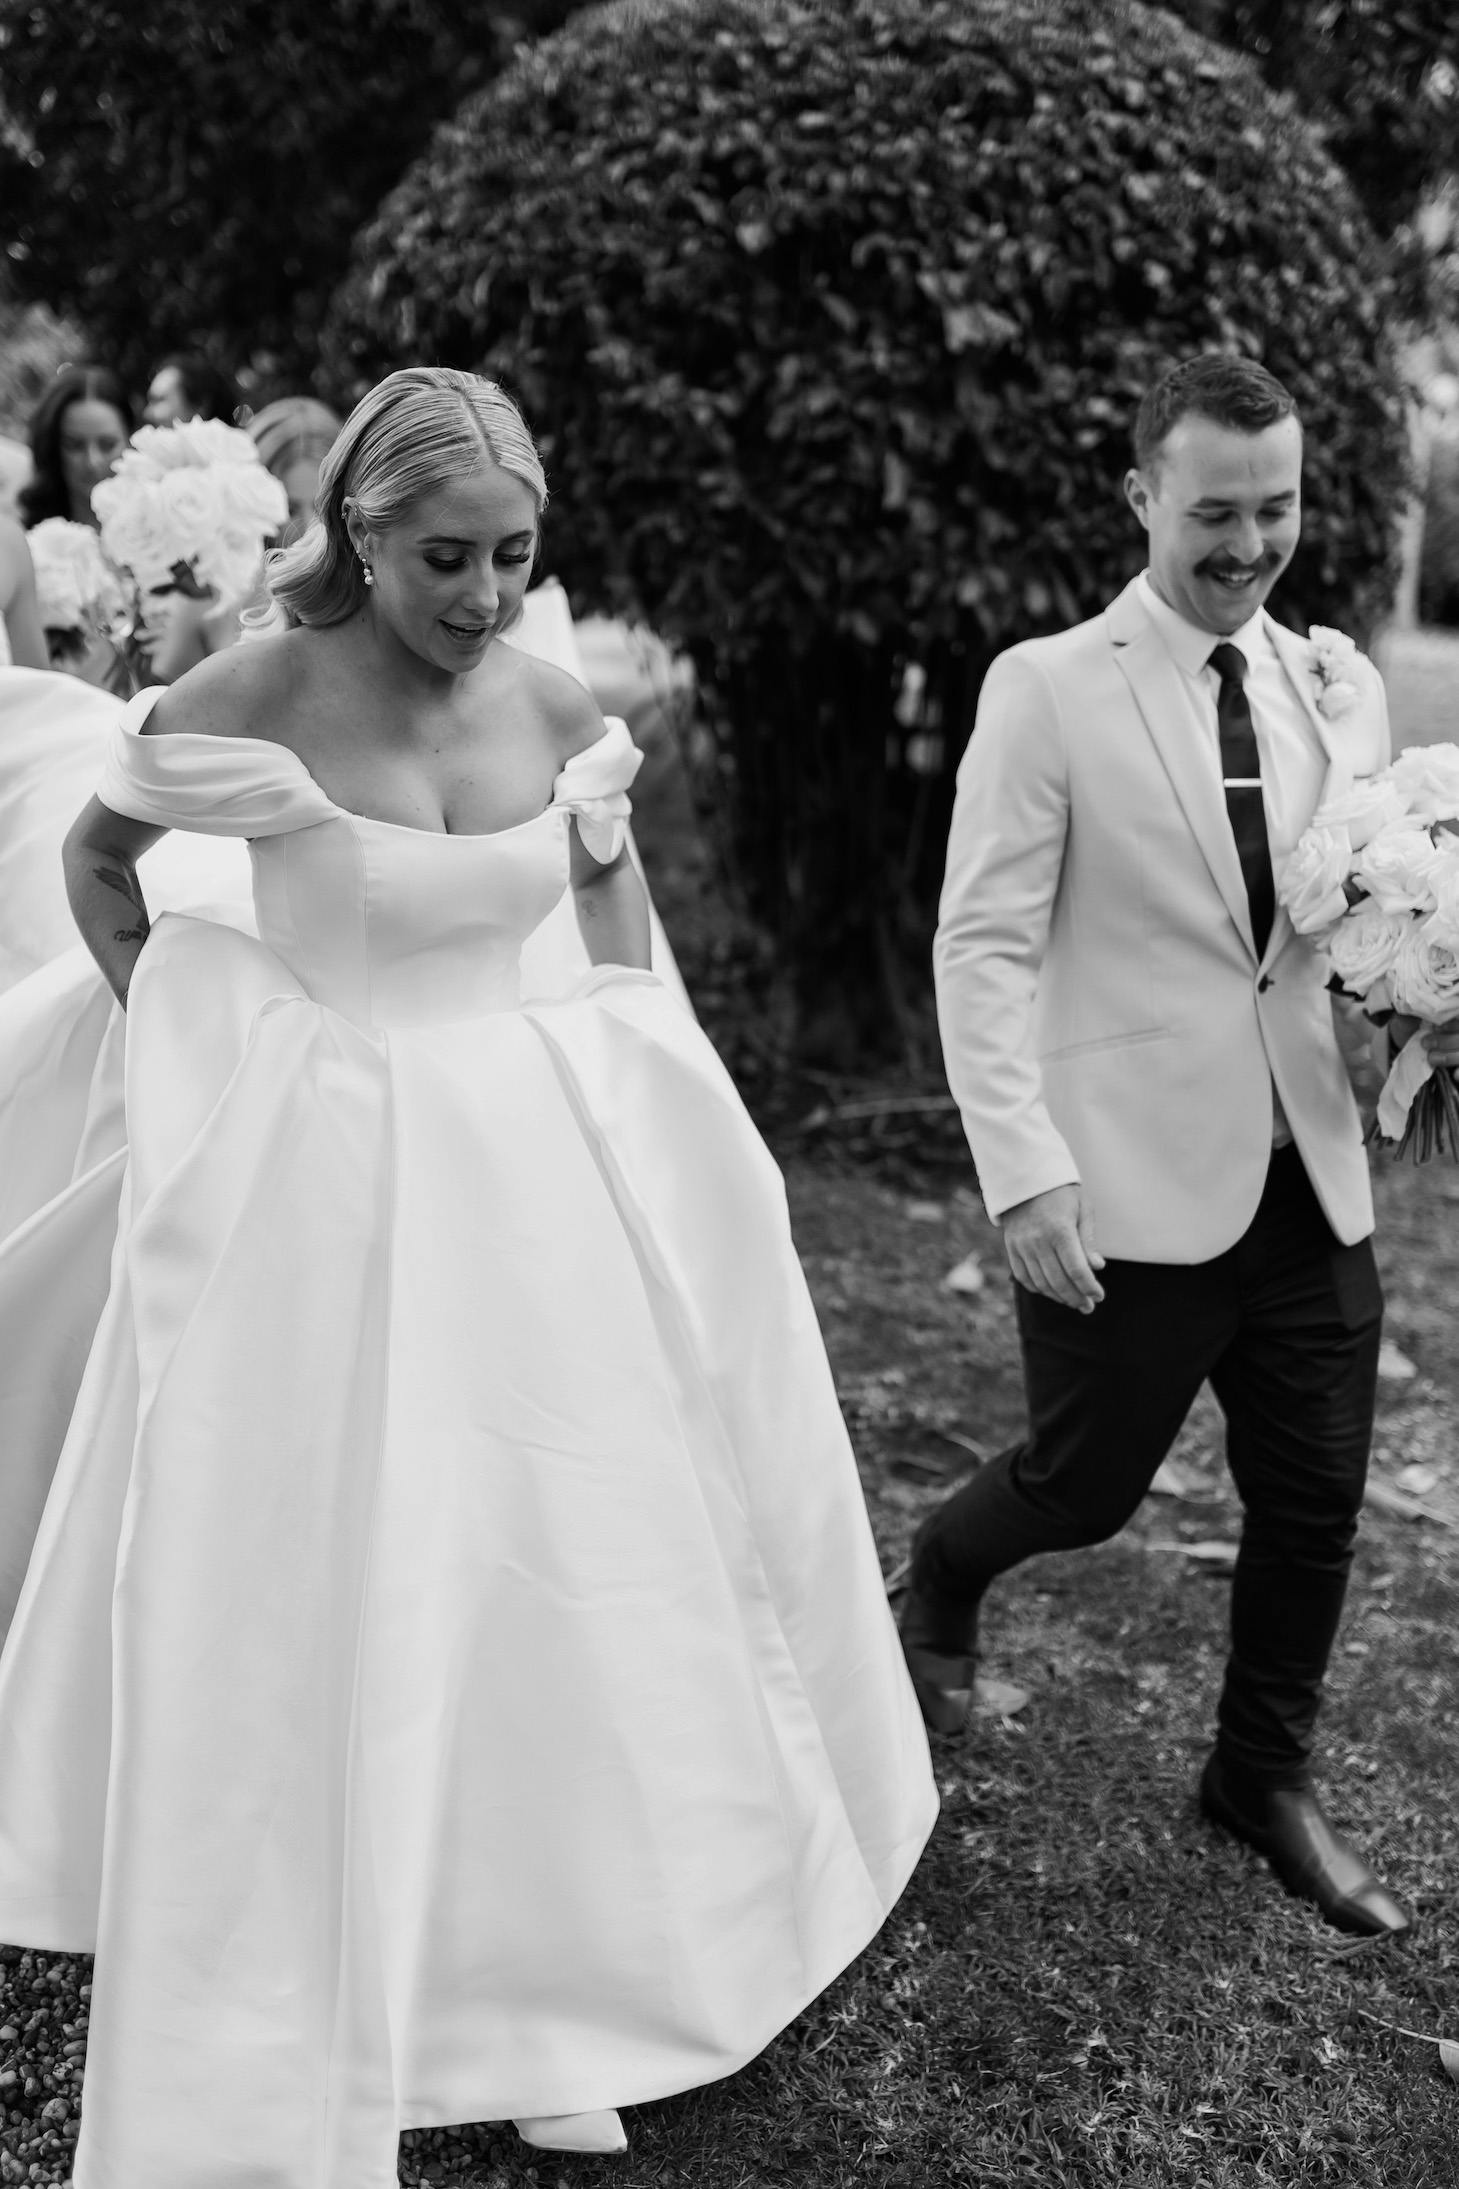 A black and white photo of a wedding couple walking outdoors. The bride wears an off-the-shoulder ball gown and smiles while holding her dress. The groom, dressed in a light suit jacket and dark pants, walks beside her carrying a bouquet. Bridesmaids follow in the background.